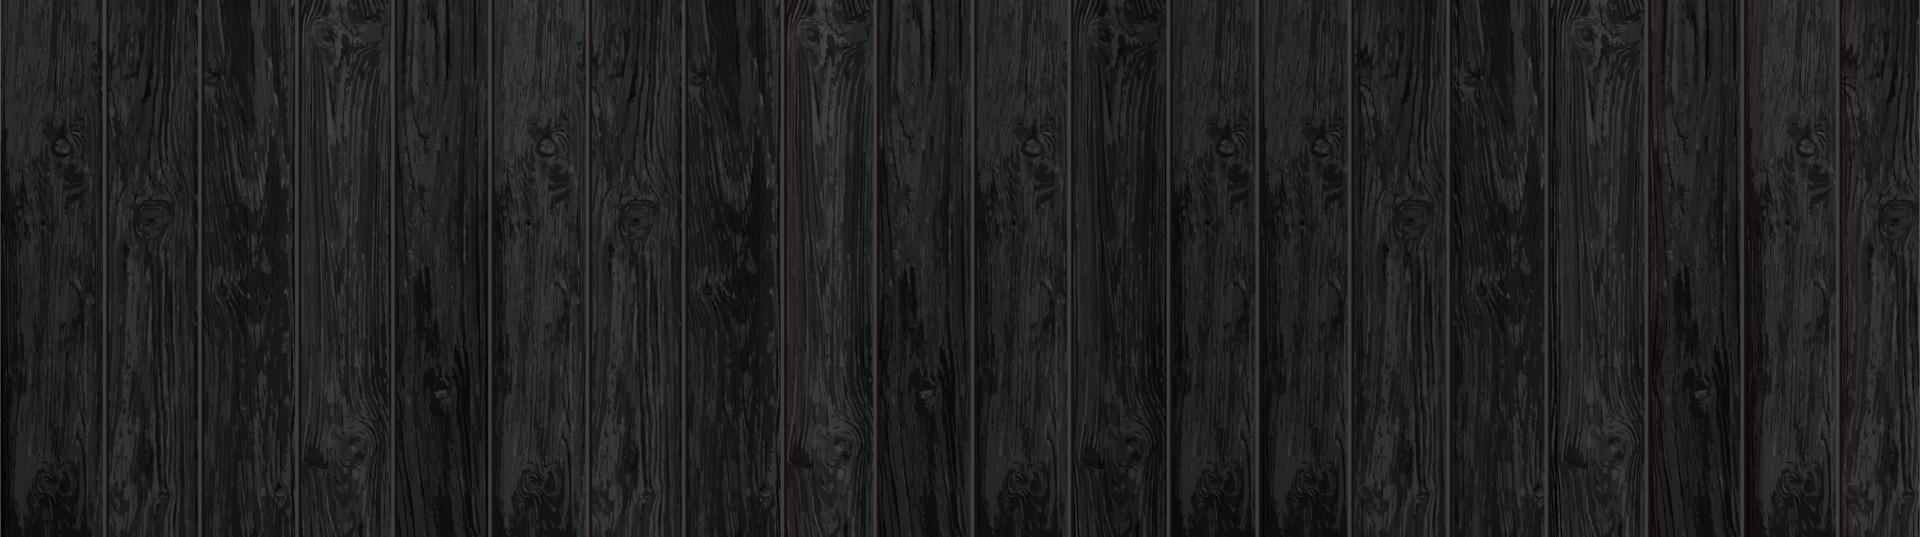 Realistic black wooden board background vector